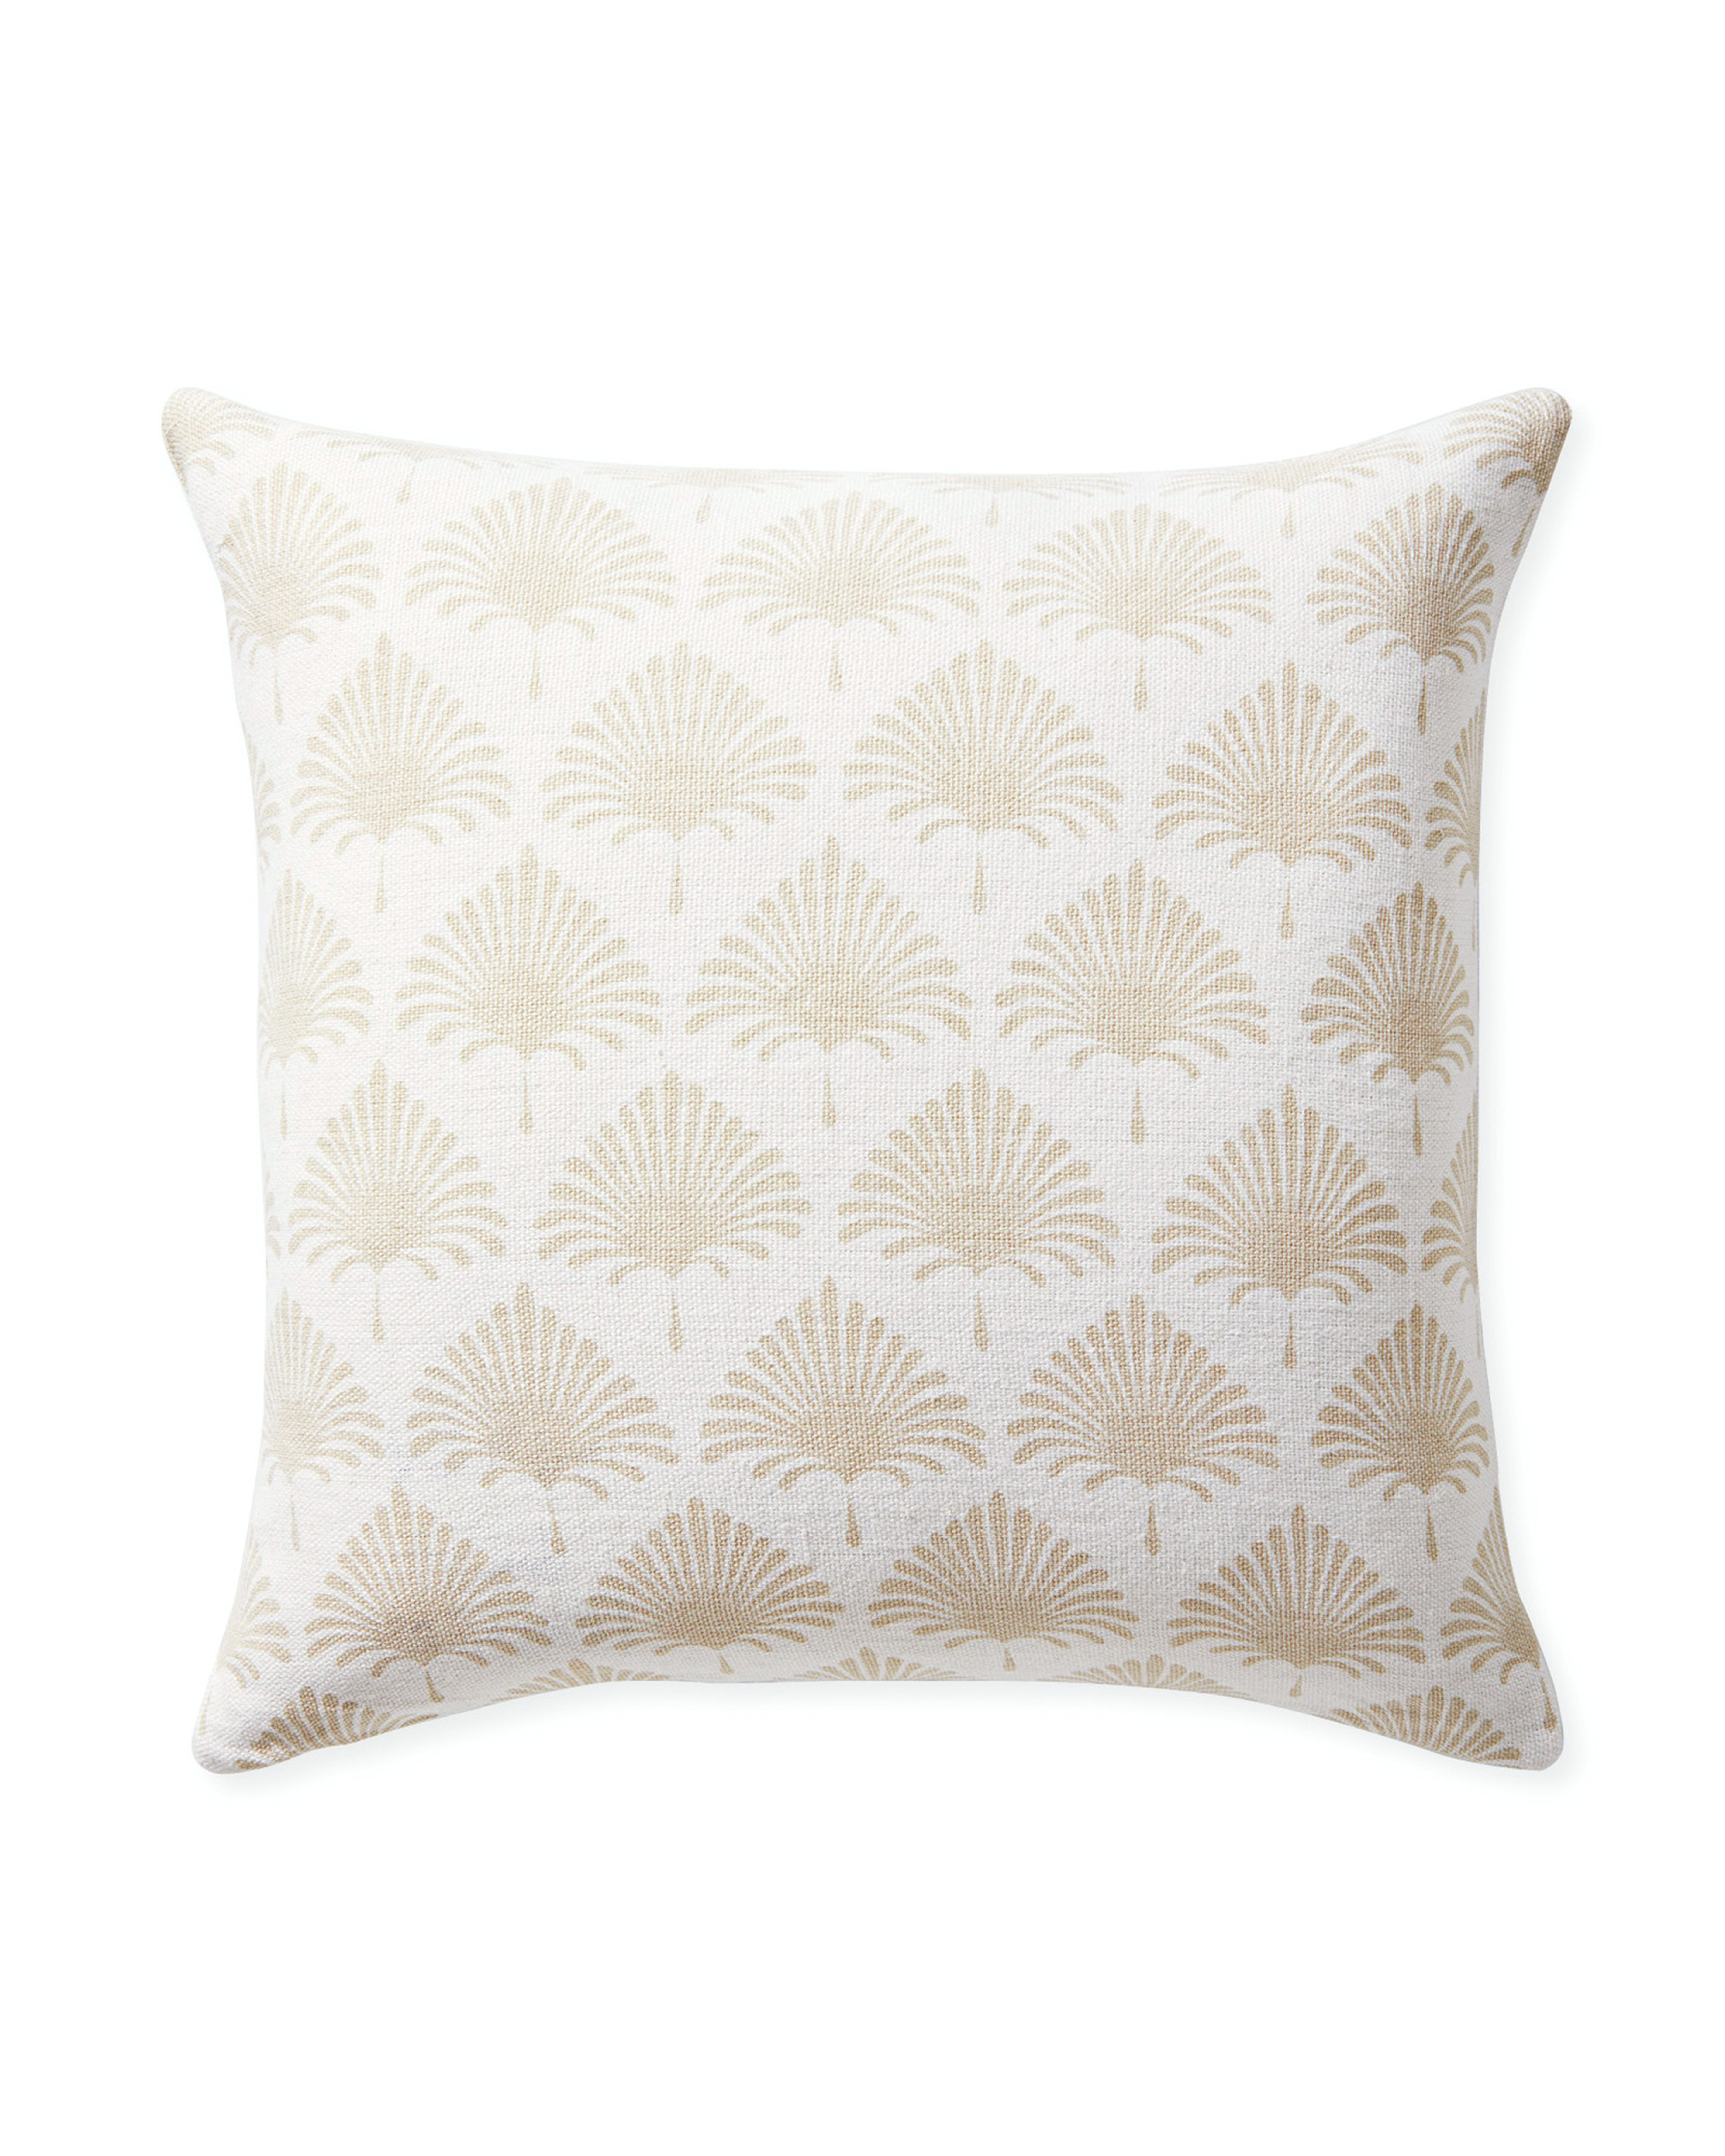 Paloma Pillow Cover, Sand - 22x22 - No Insert - Serena and Lily